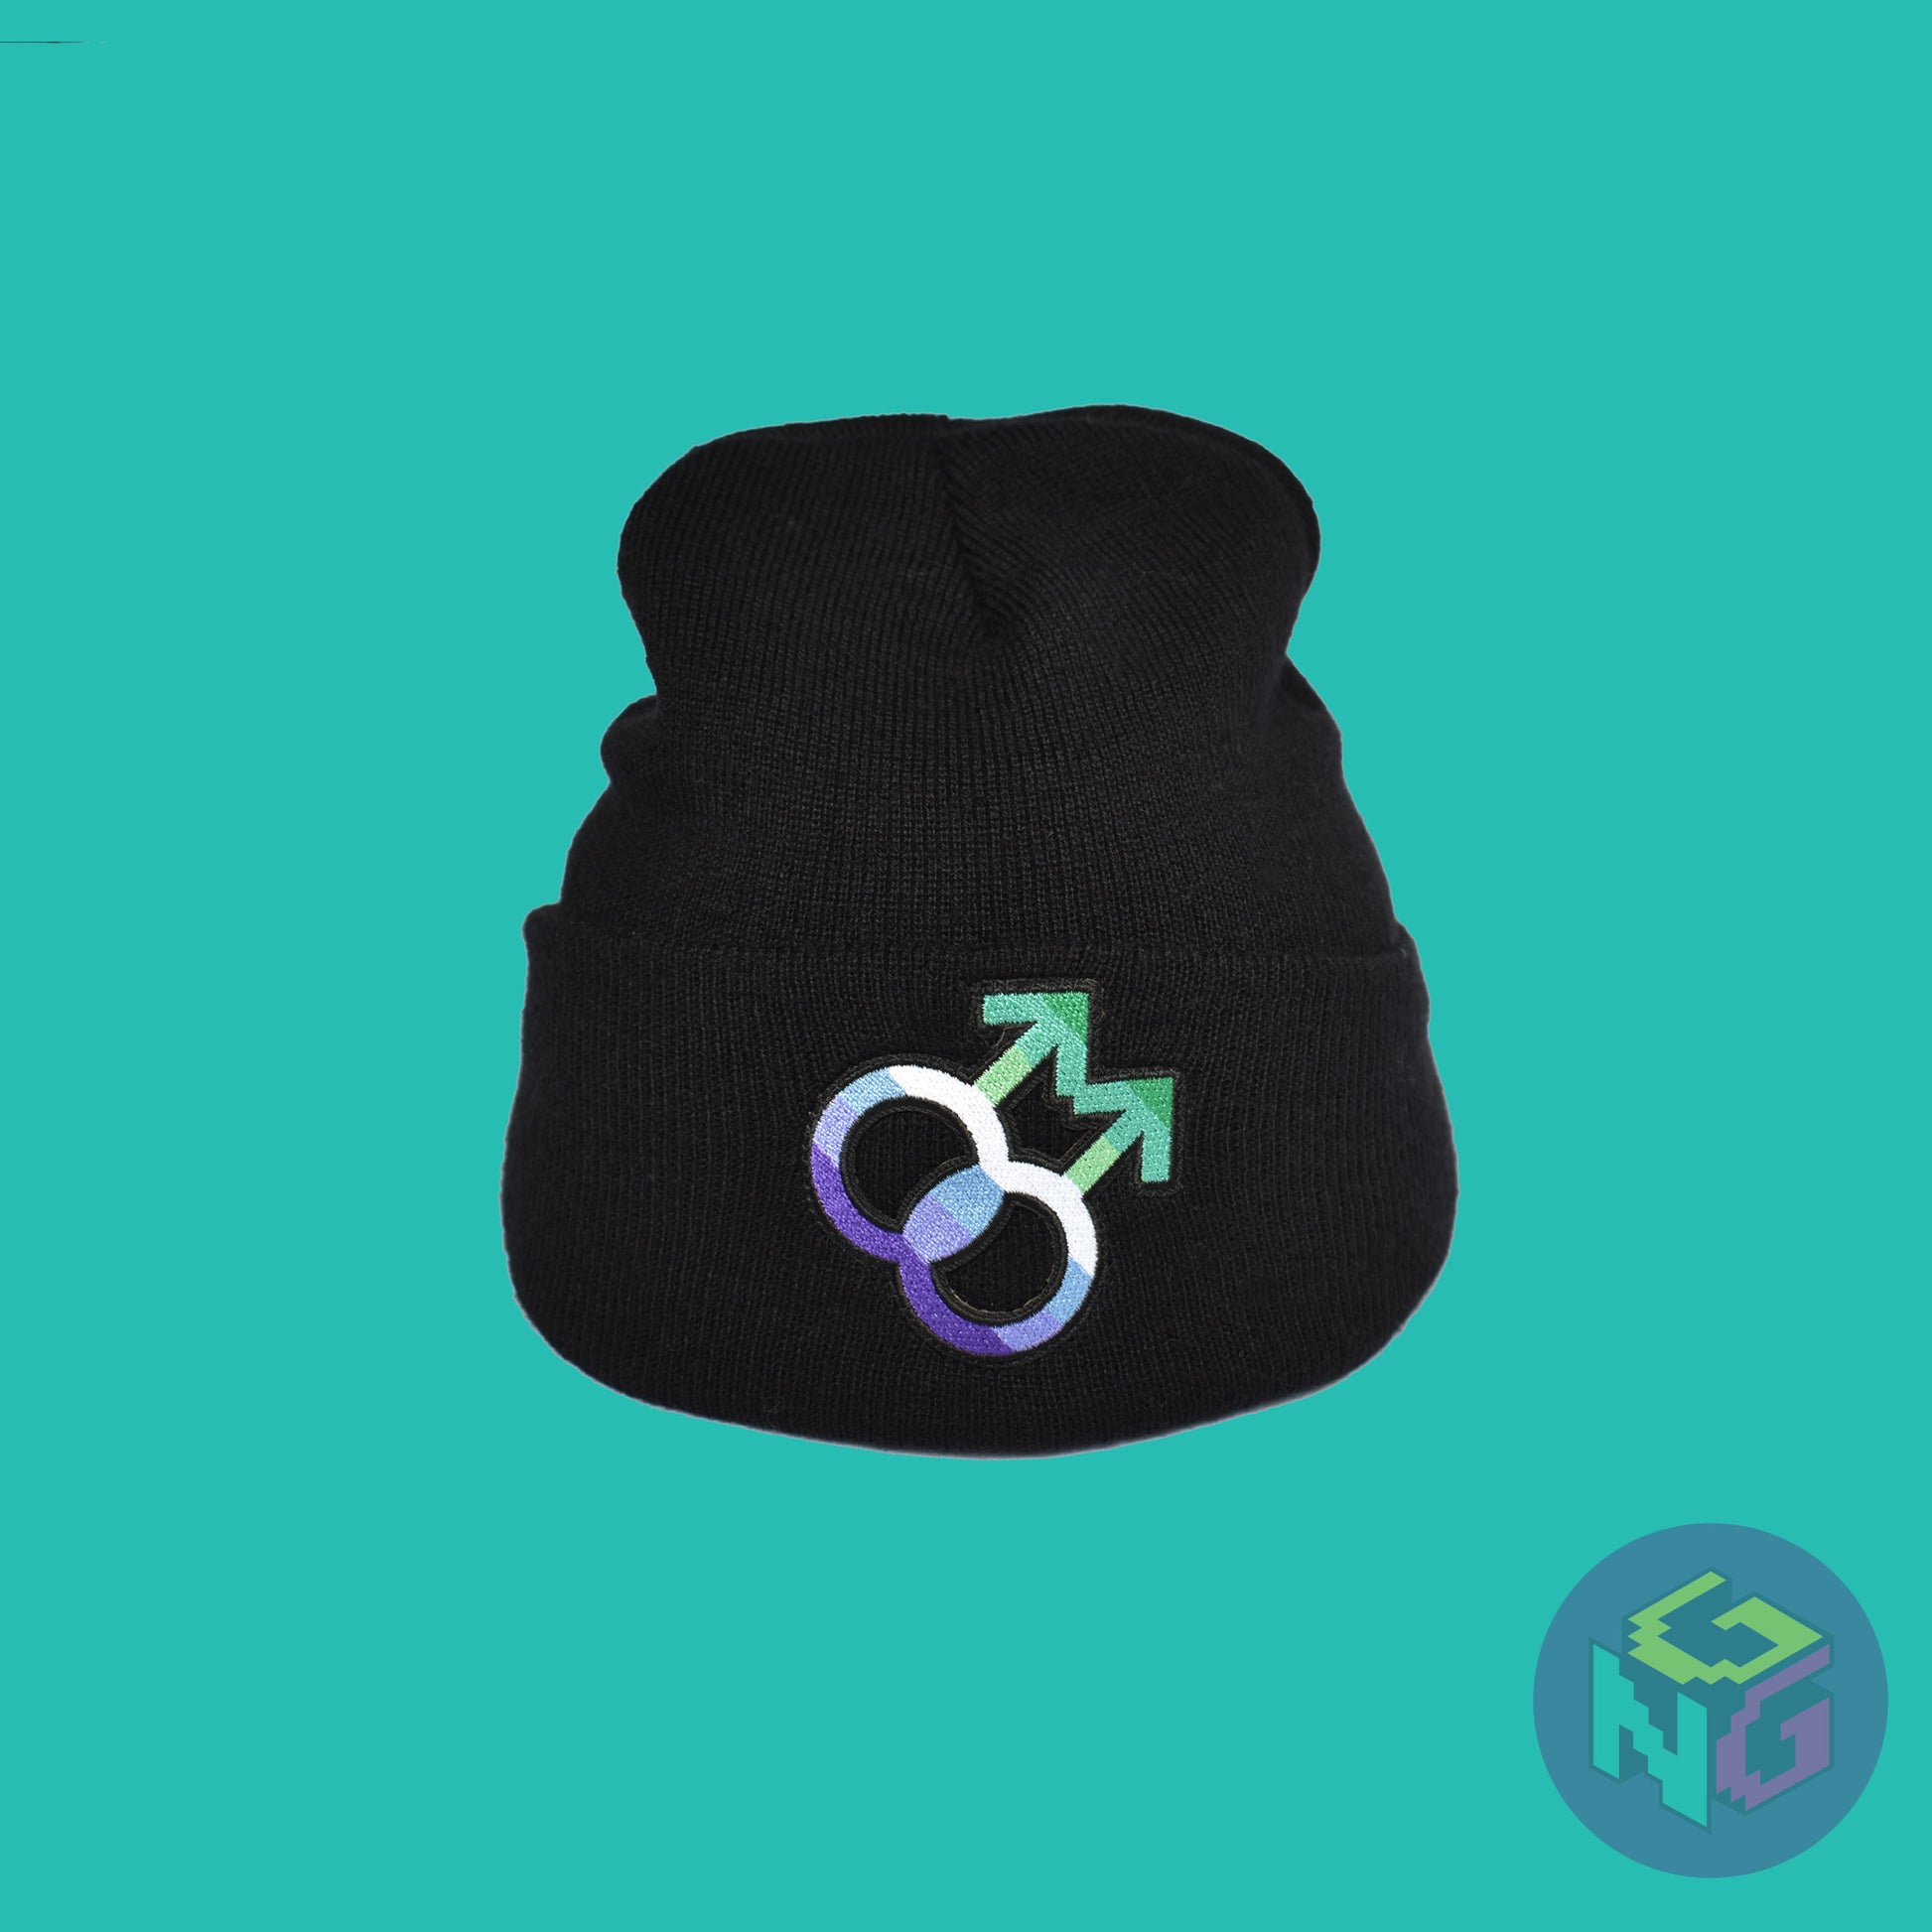 Black knit fabric beanie with the gay symbol in greens, blues, and white on the front. It is stretched and sitting upright in a front view